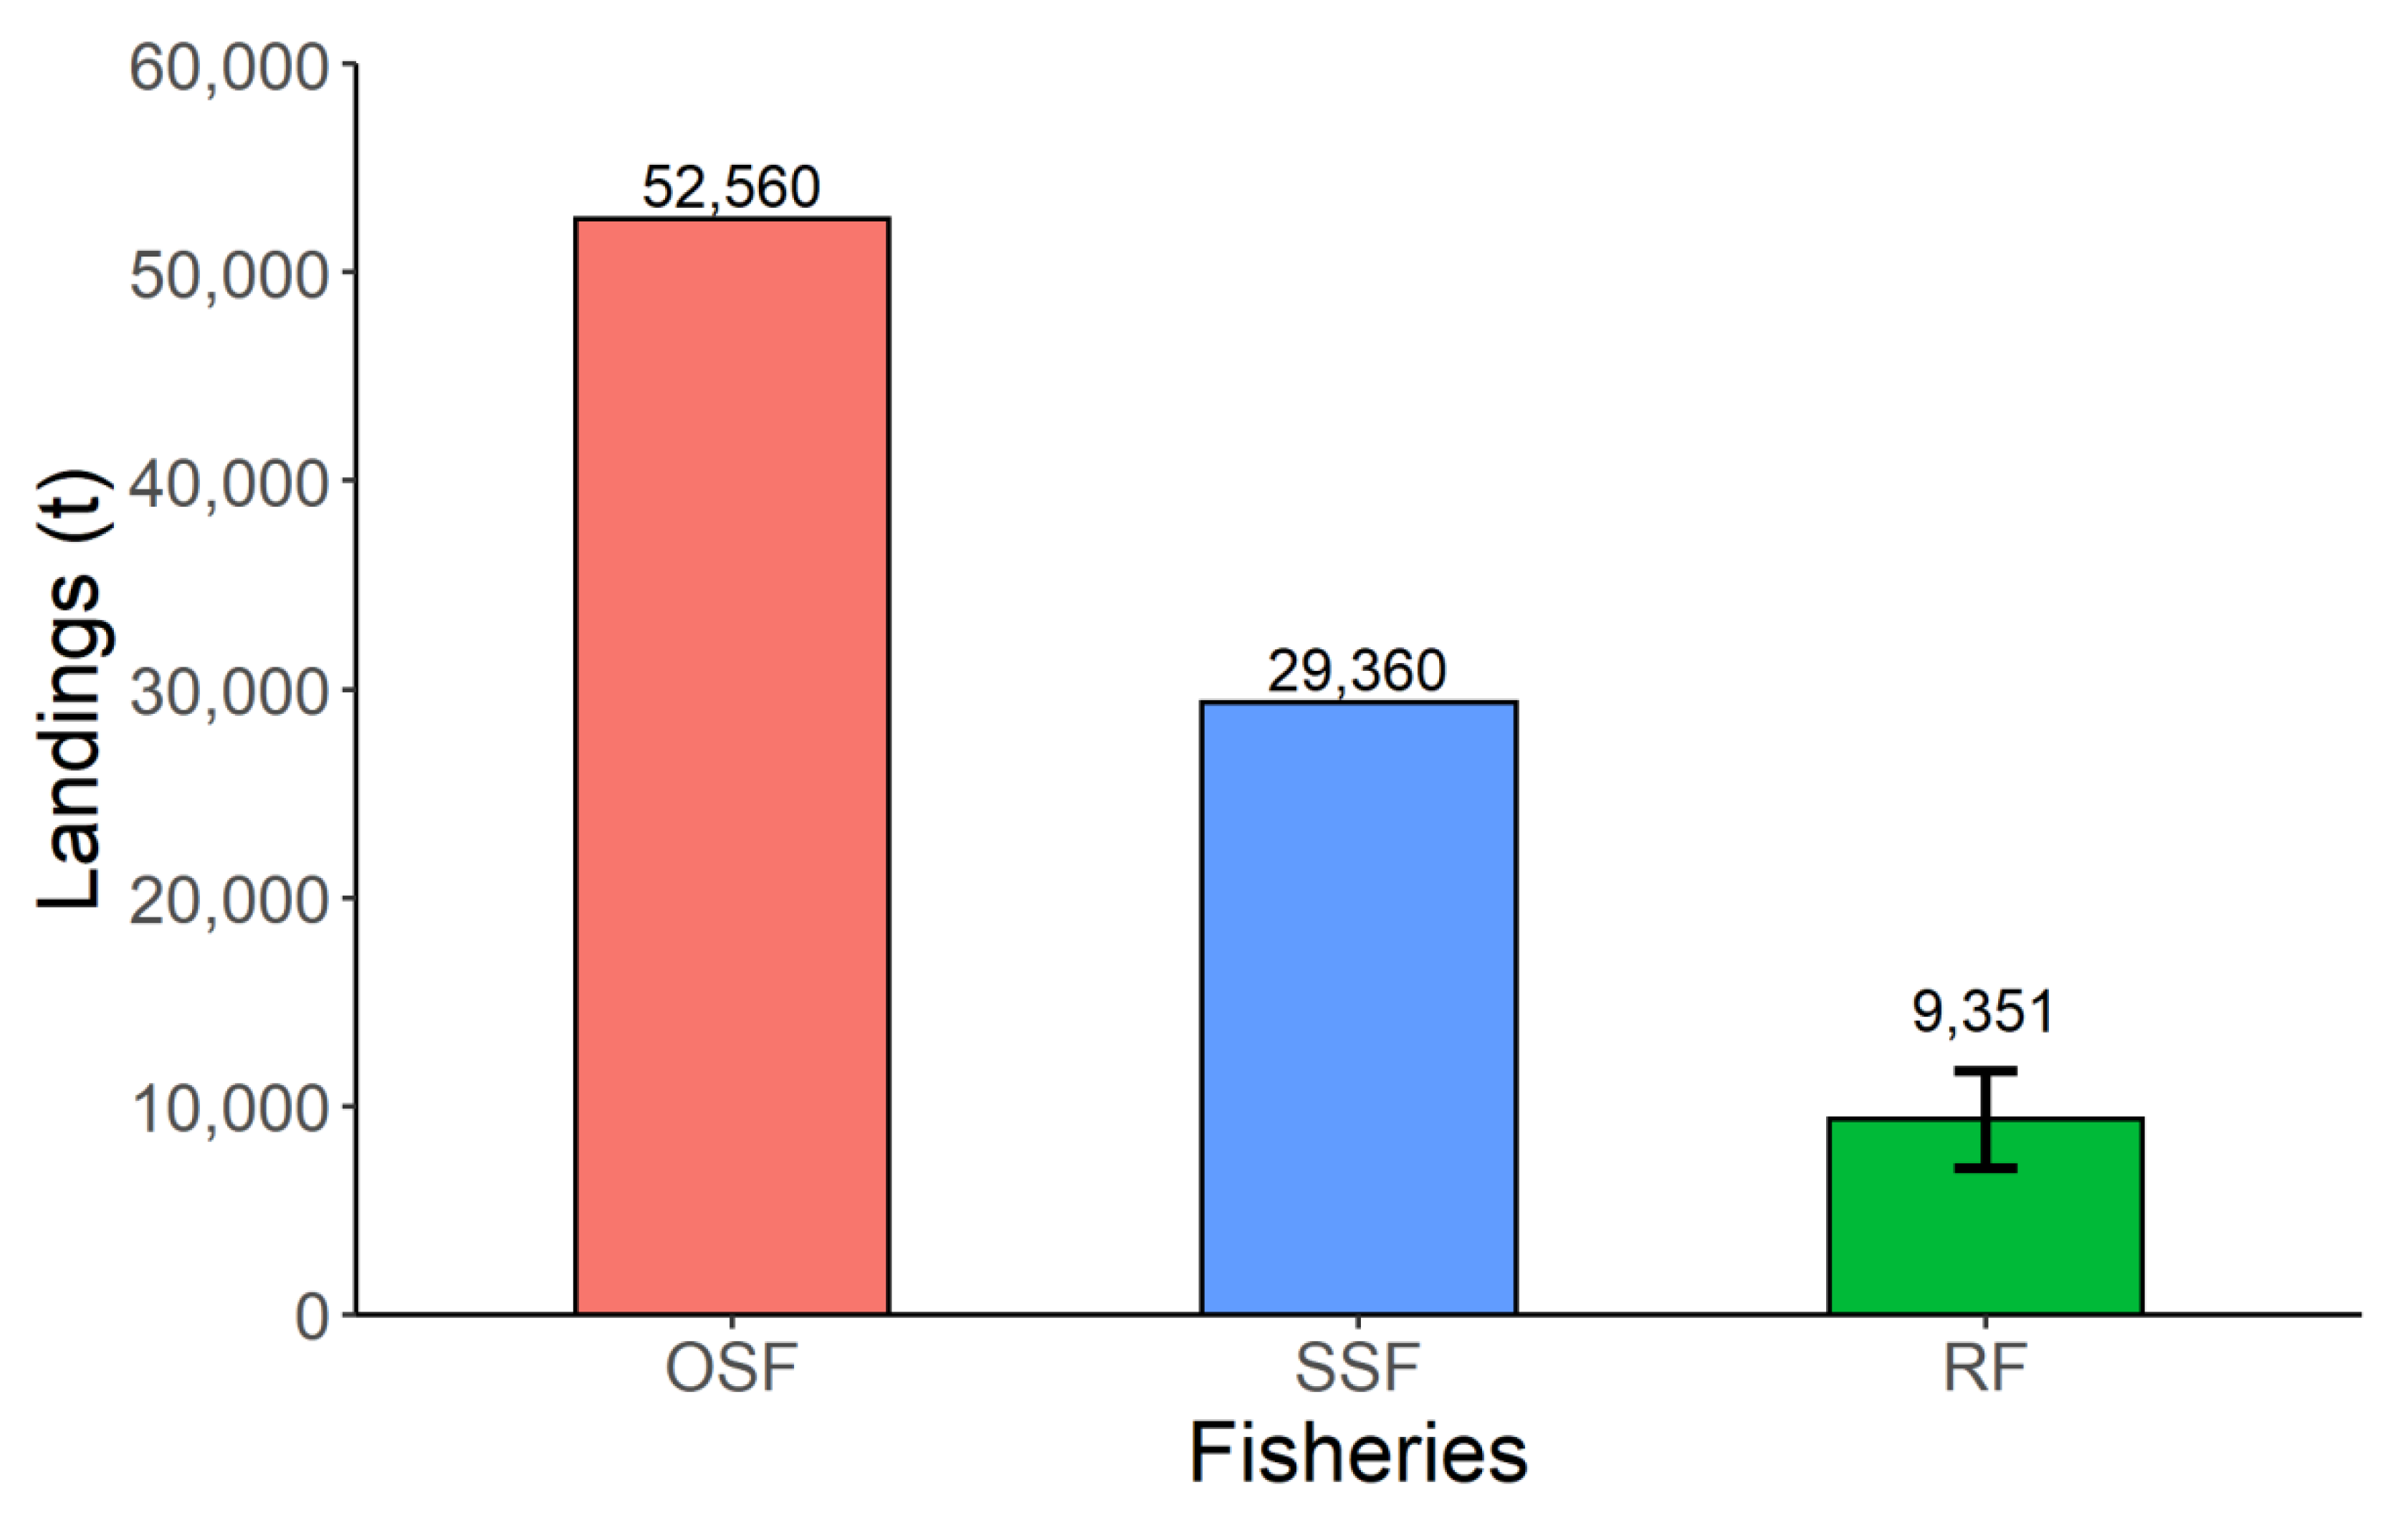 Summary diagram of various types of commonly used commercial fishing